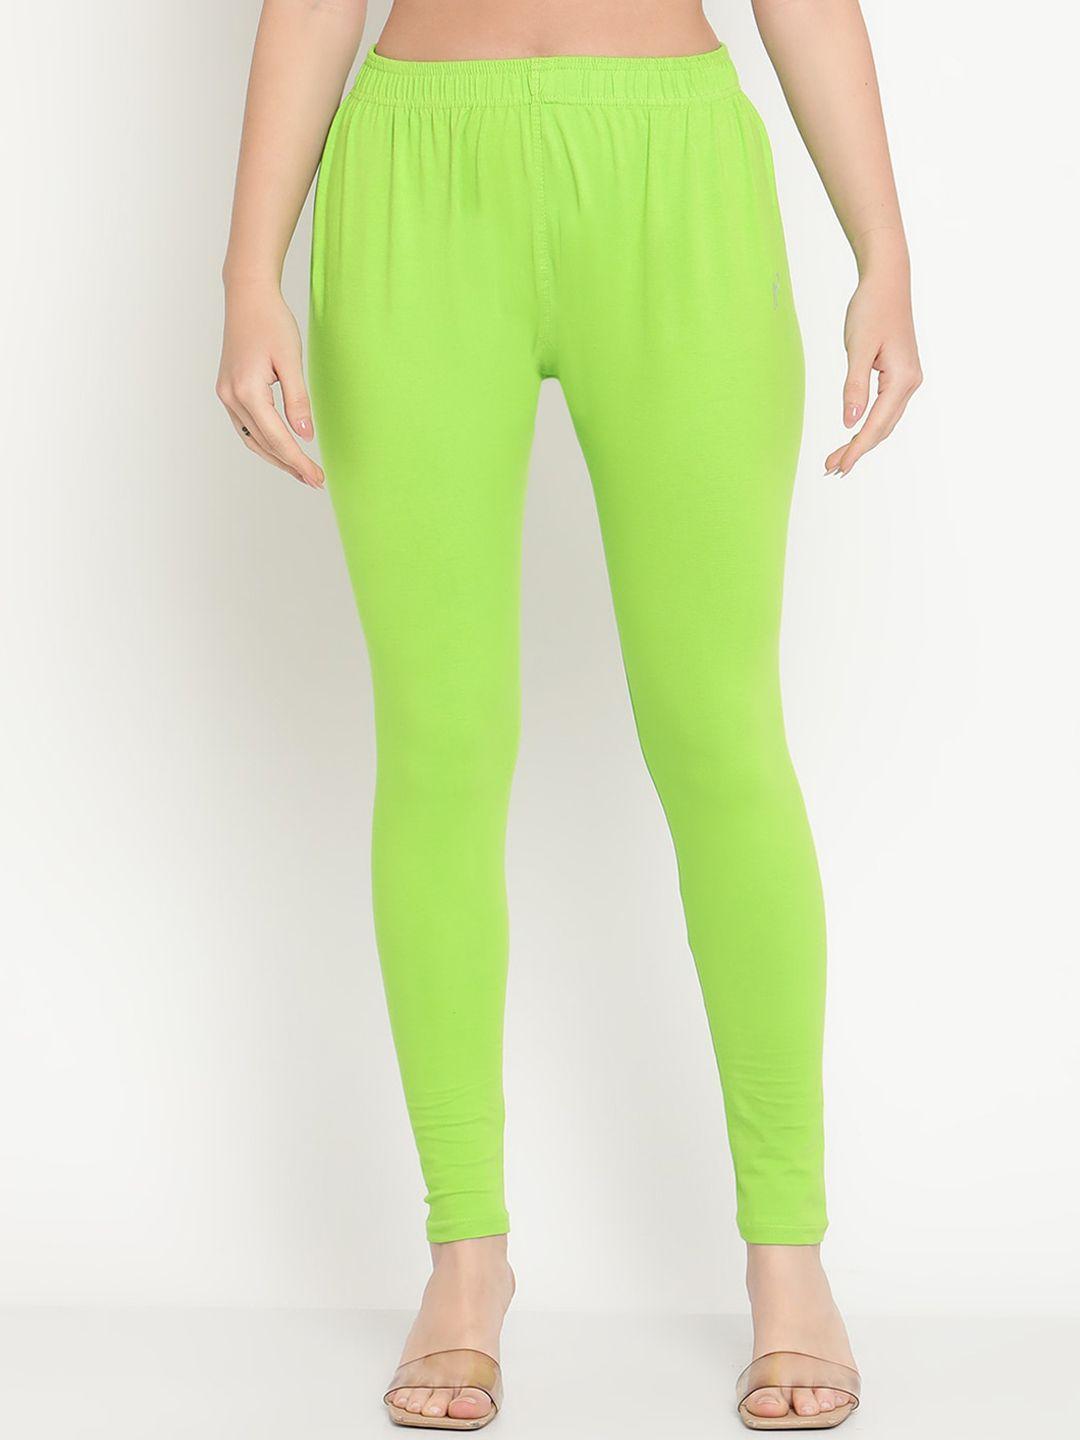 tag 7 women green solid ankle-length cotton leggings